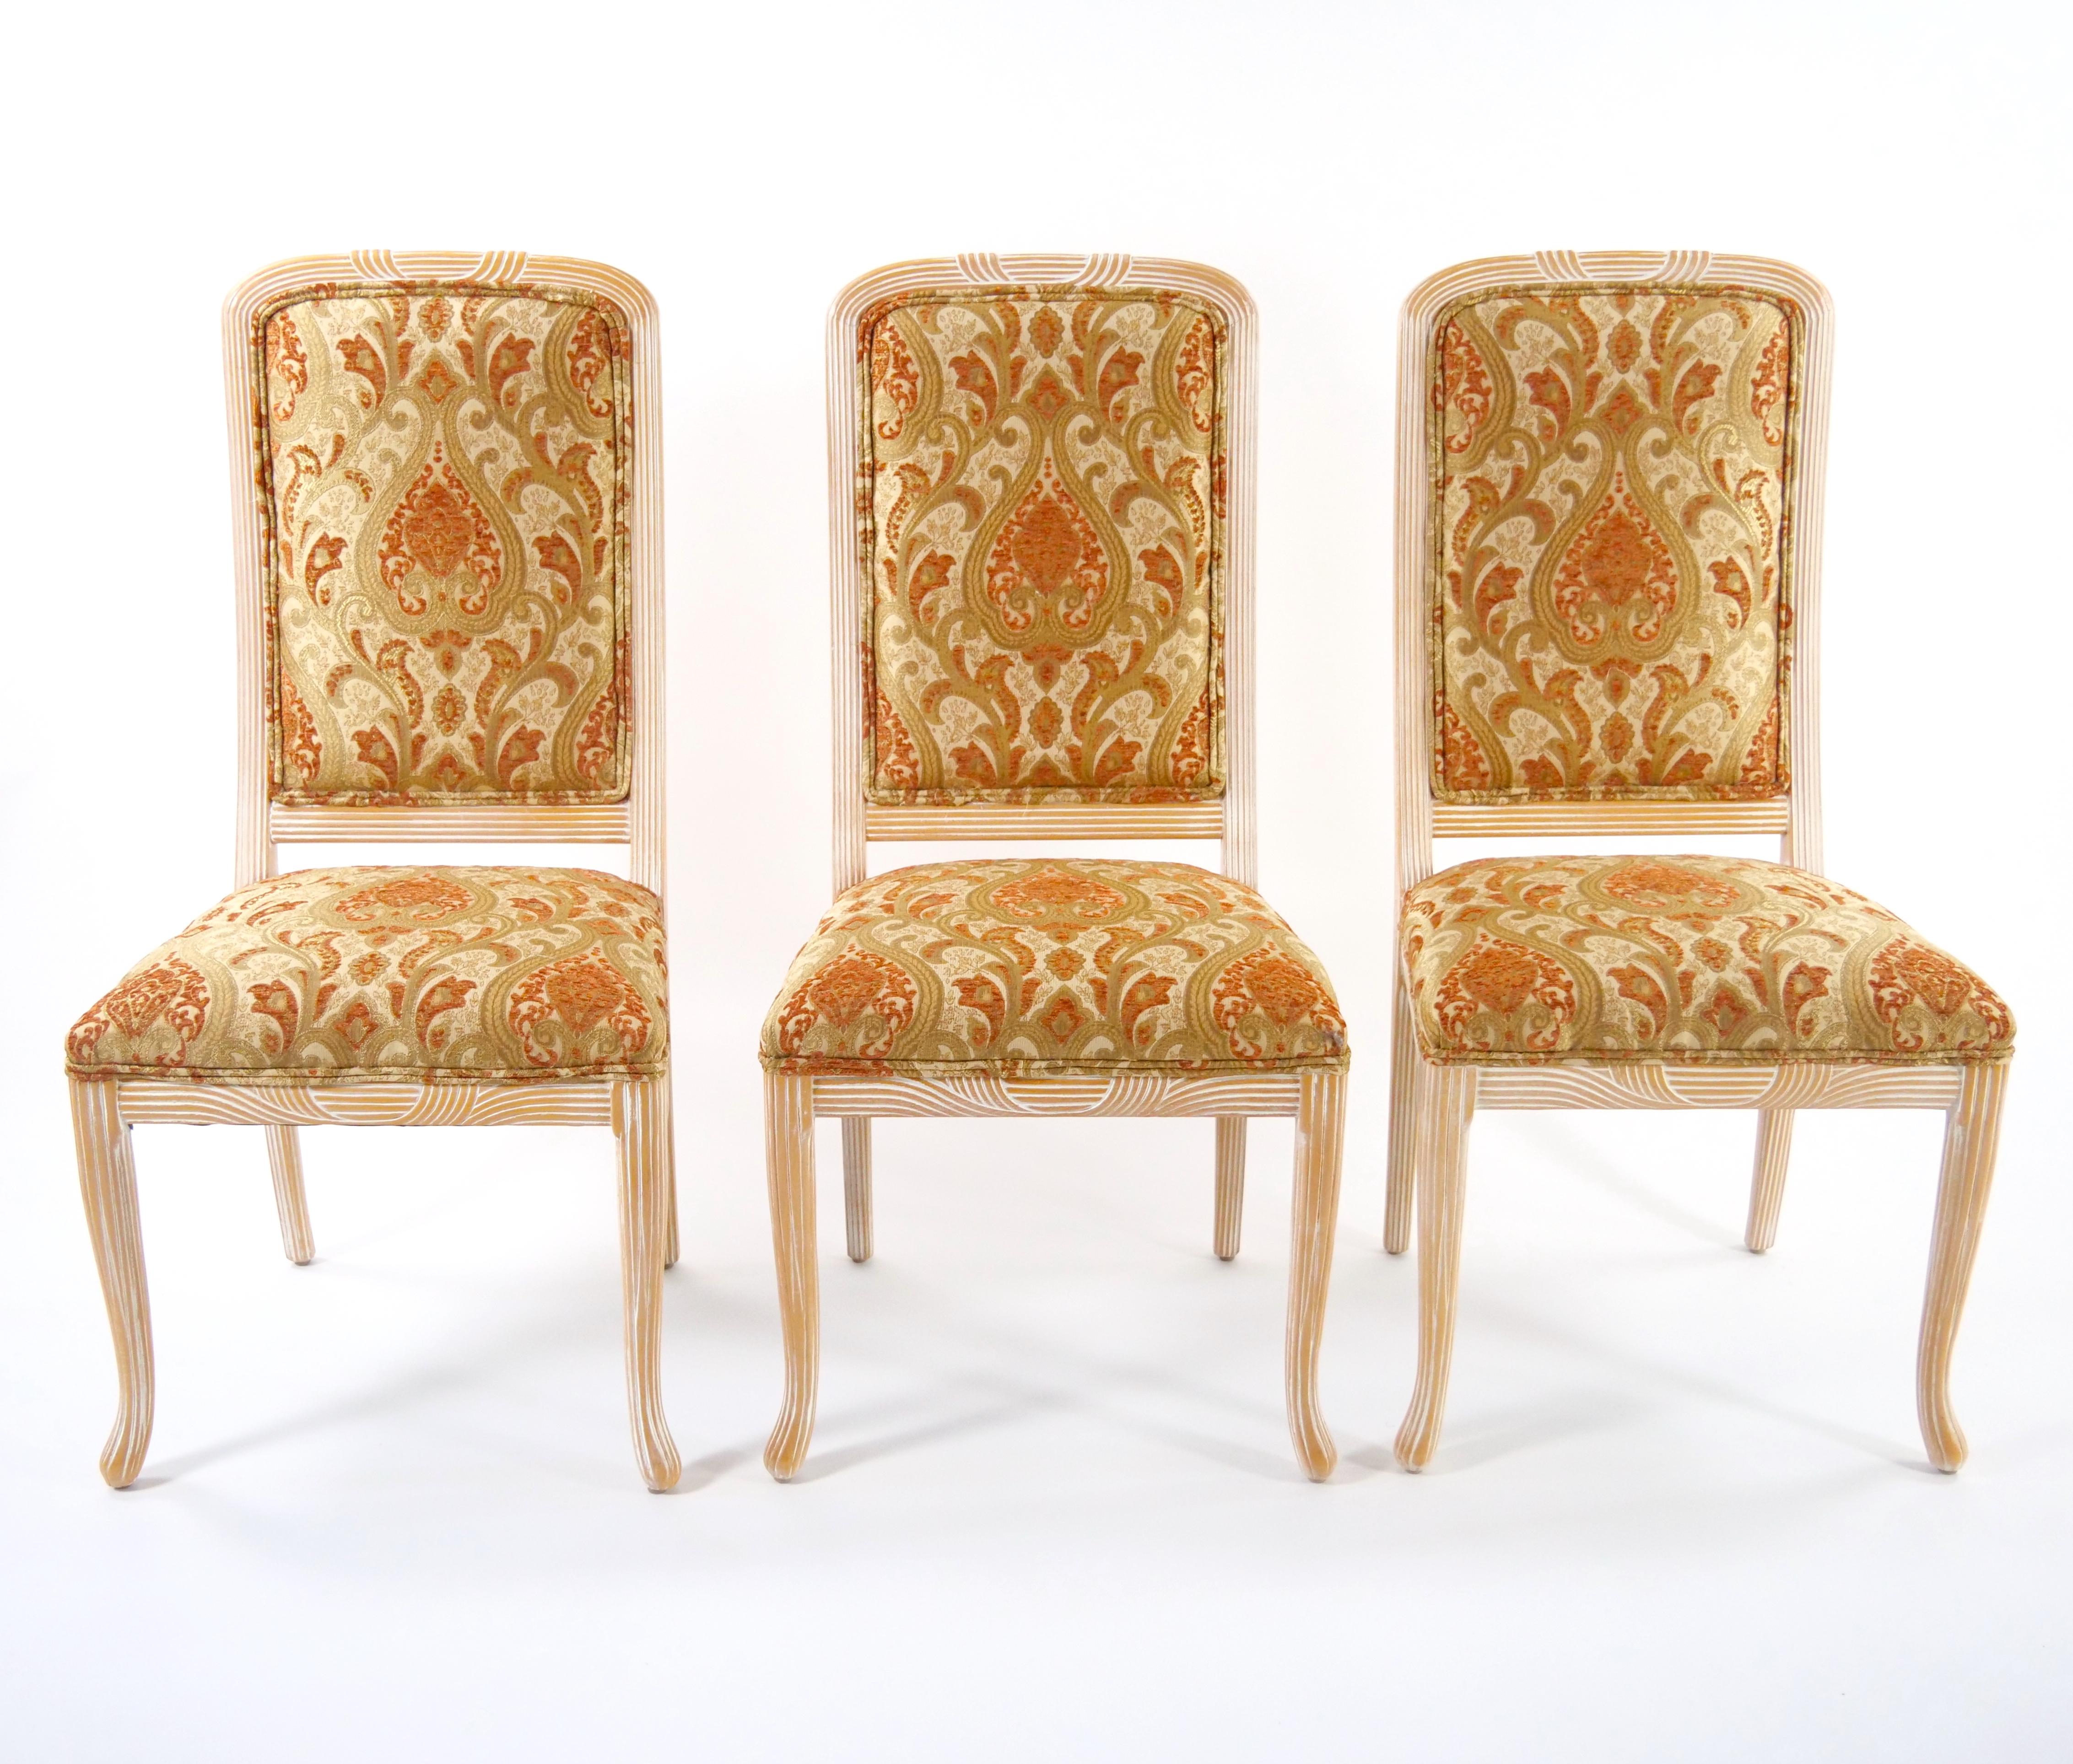 Italian Hand Painted / Carved Upholstered Dining Room Chair Set In Good Condition For Sale In Tarry Town, NY